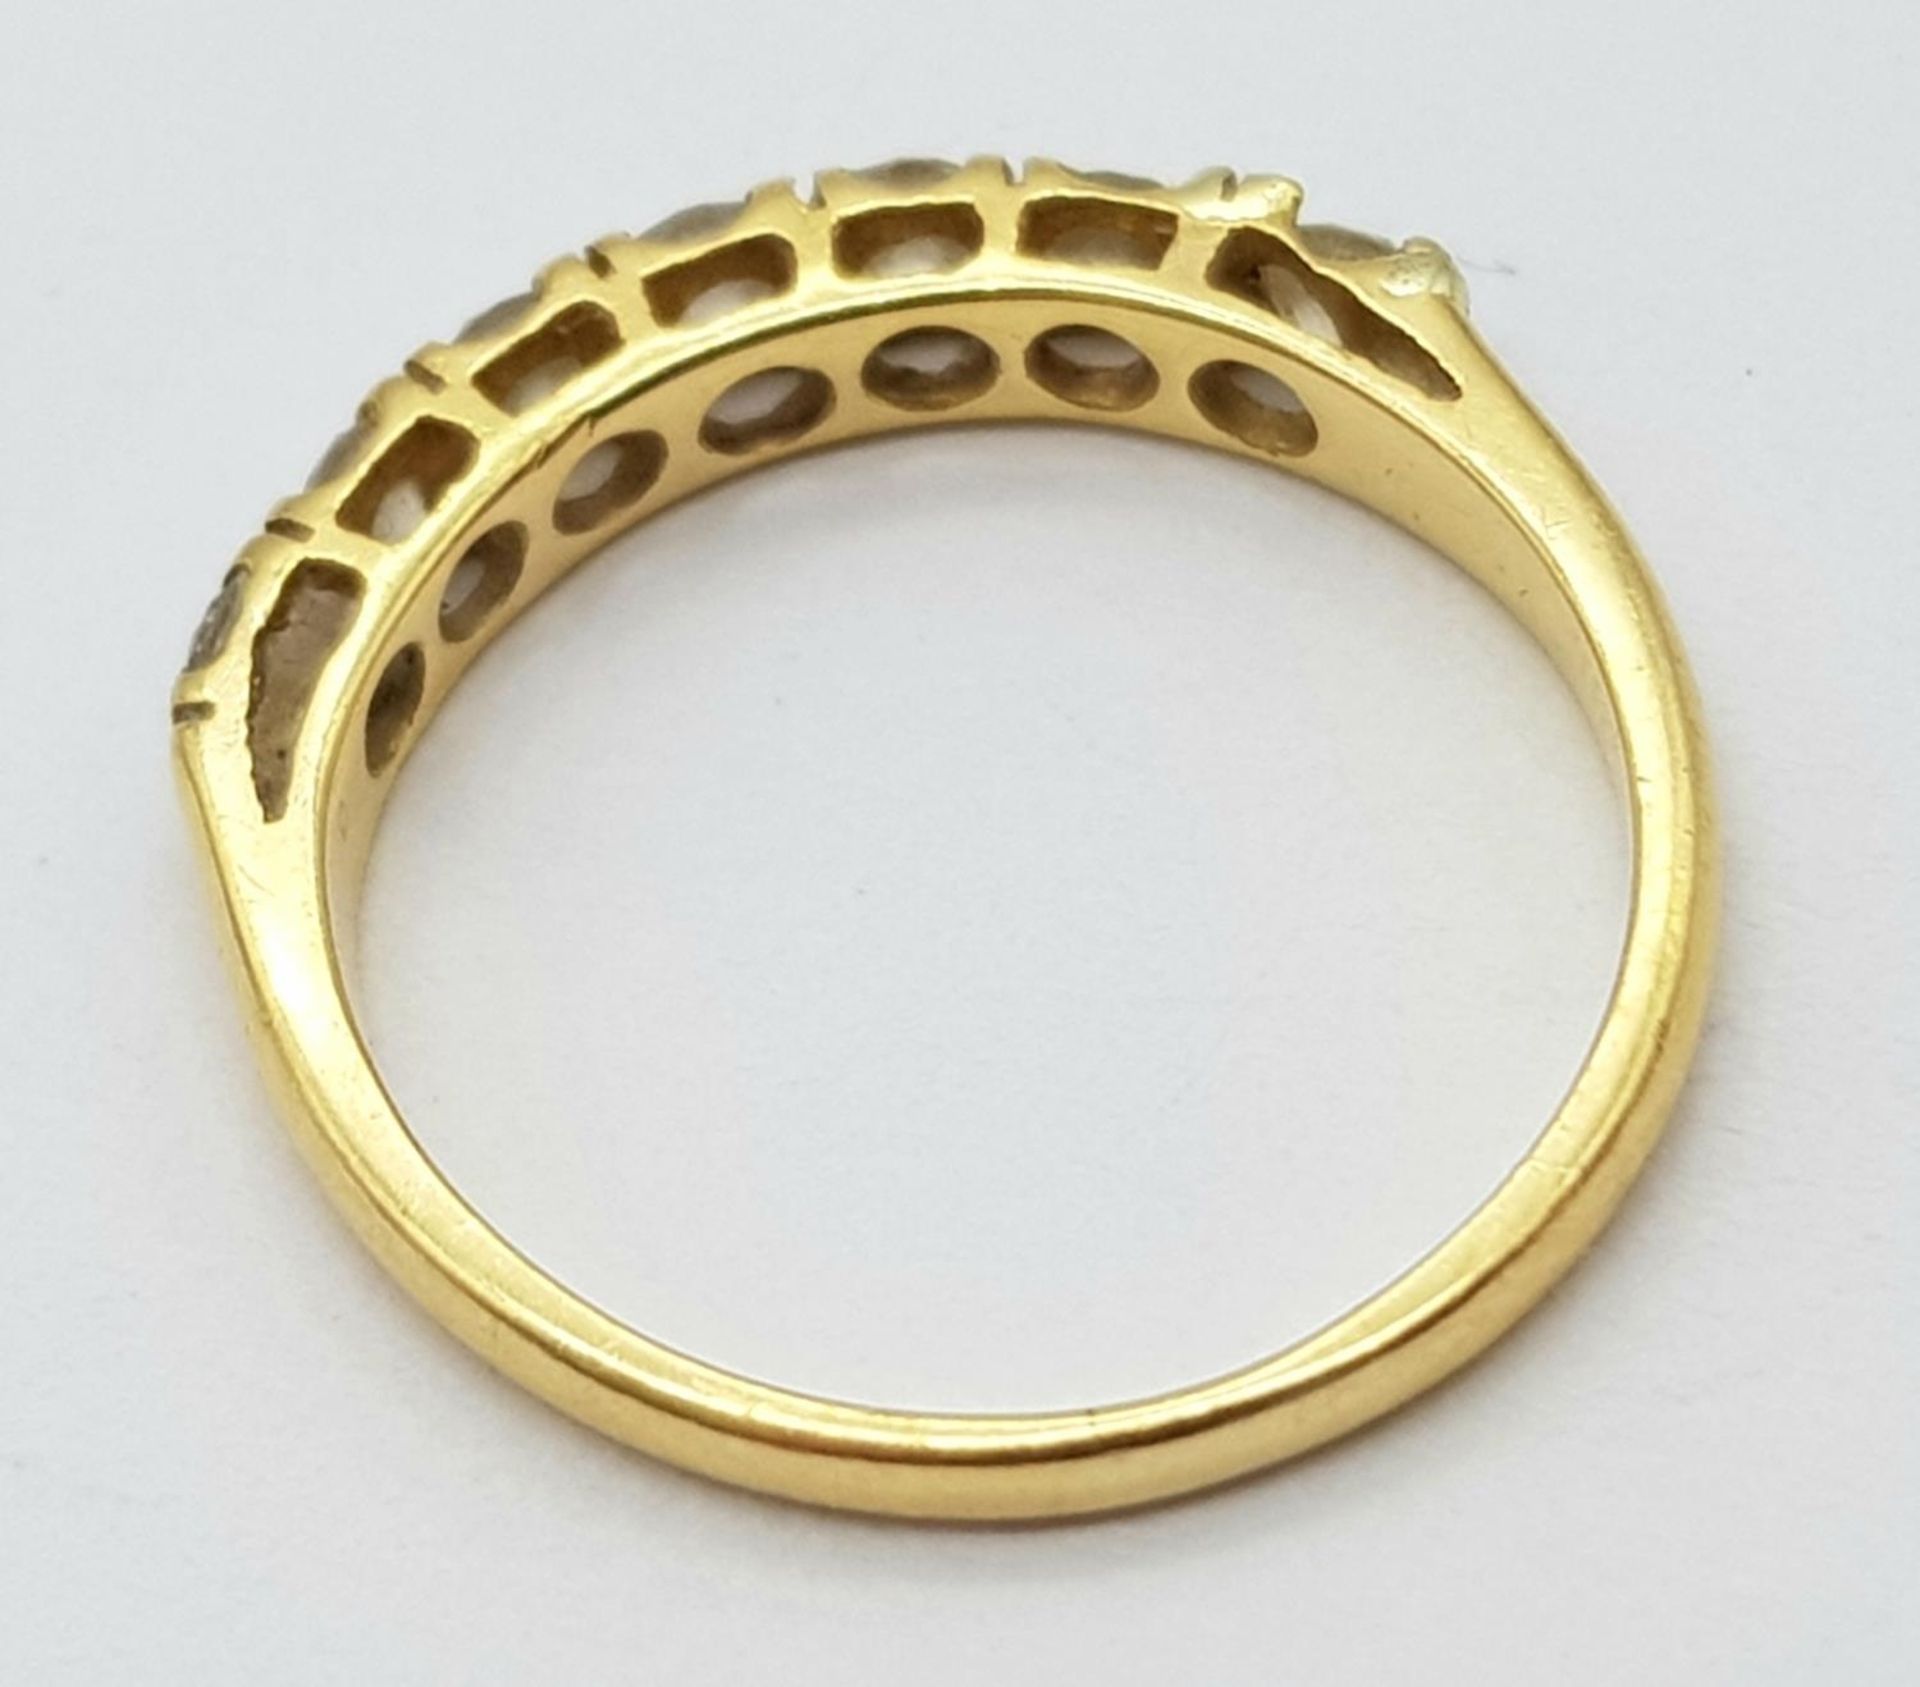 AN 18K (TESTED) YELLOW GOLD DIAMOND BAND RING. 0.35ctw, size I, 1.9g total weight. Ref: SC 9043 - Image 4 of 4